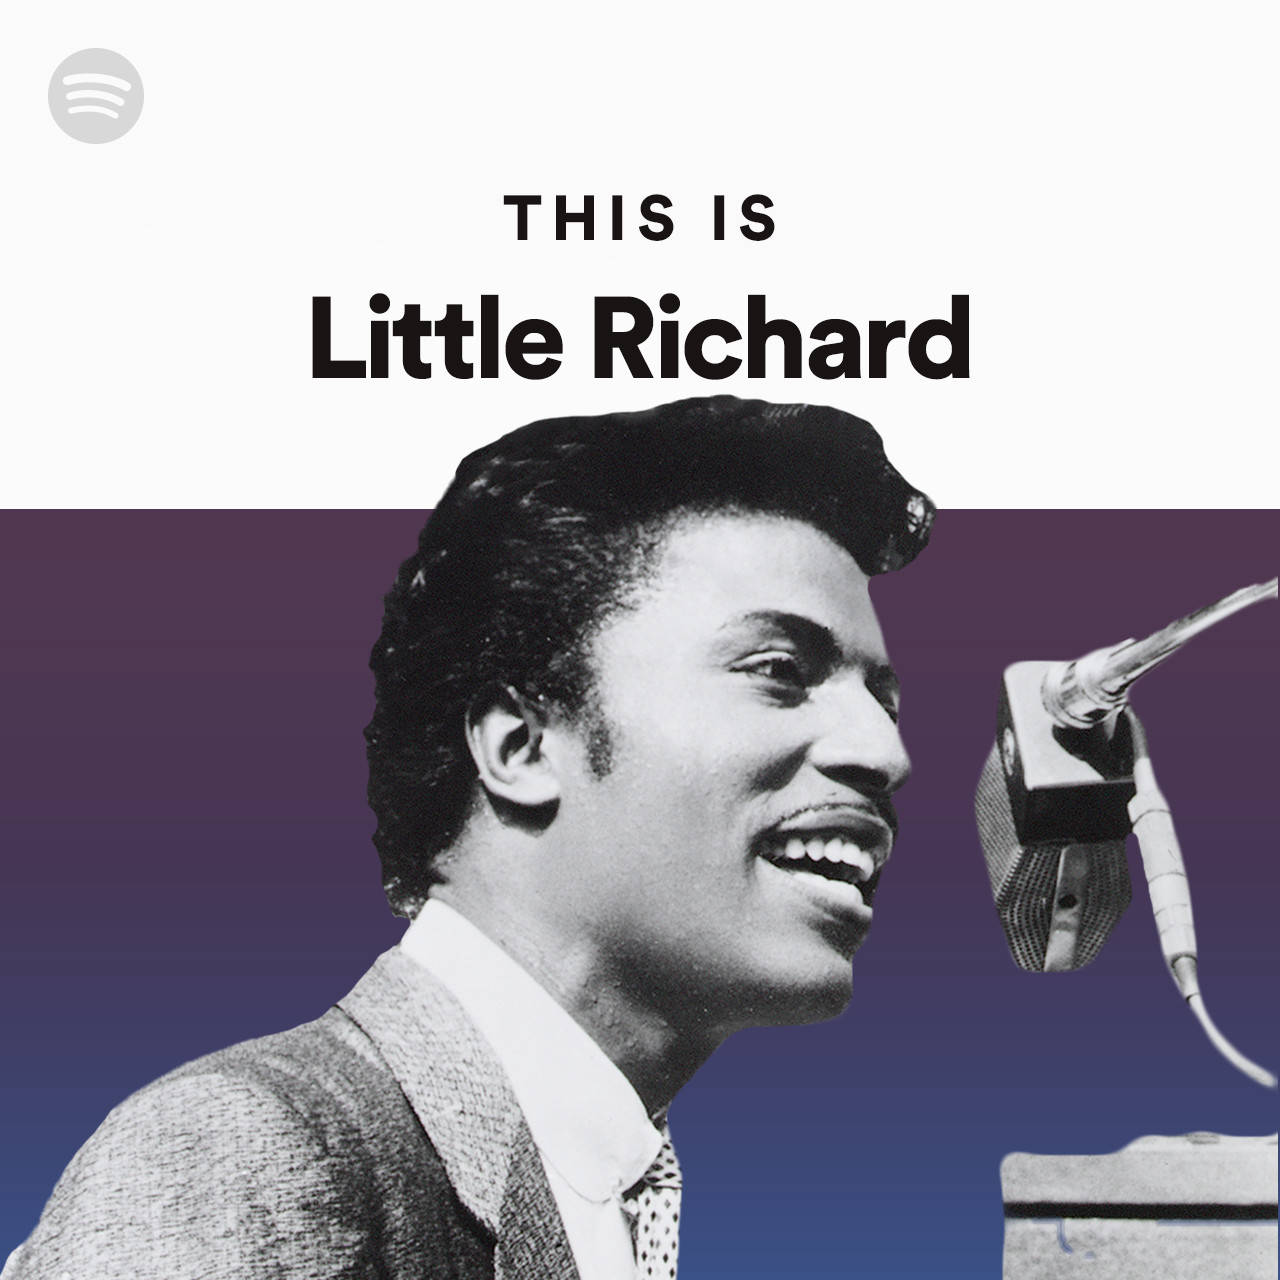 This Is Little Richard Spotify Playlist Cover Wallpaper